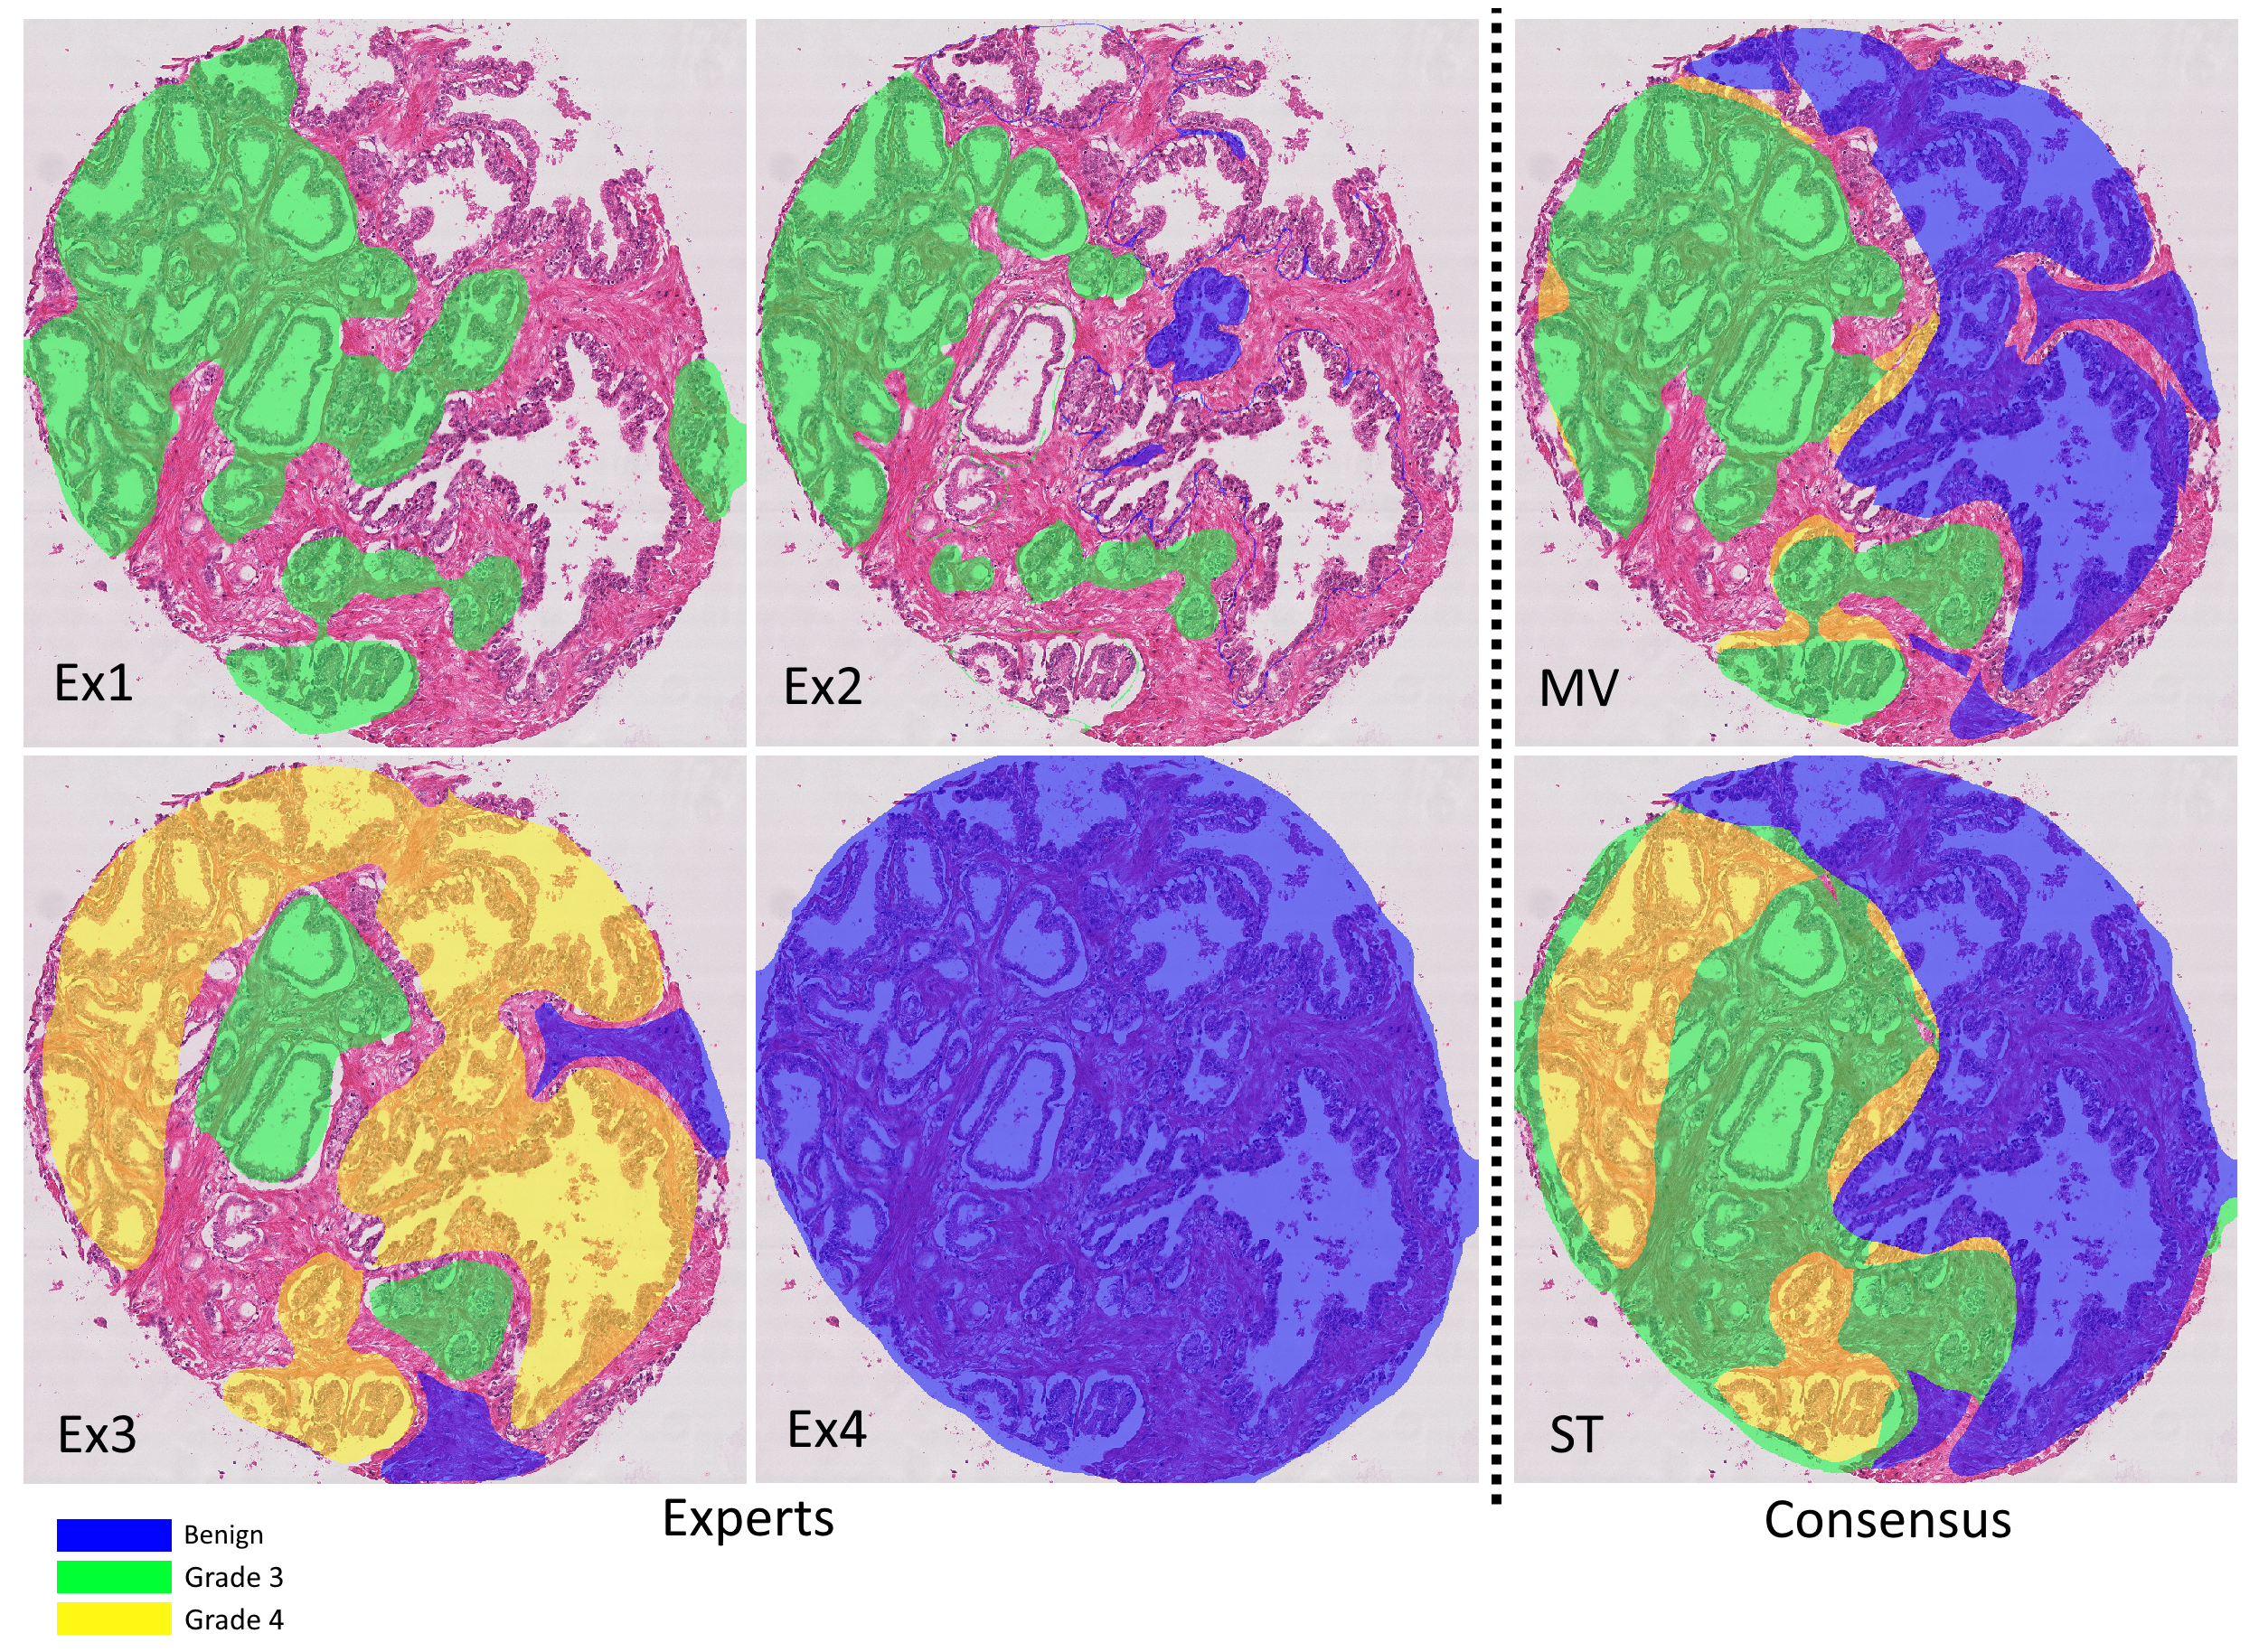 Figure 7.6. Six annotation maps for the same core sample: four experts, two consensus methods (Majority Vote (MV) and STAPLE (ST)). The second expert shows clear mistakes in the annotation with contours (mostly blue and a bit of green) which were not properly closed. With the ISUP rule and the simple pixel counting rule, the core-level scores are 6,6,7,0 (experts) and 7 (both consensus), and the Epstein groups are 1, 1, 3, 1 (experts) and 3 (both consensus).